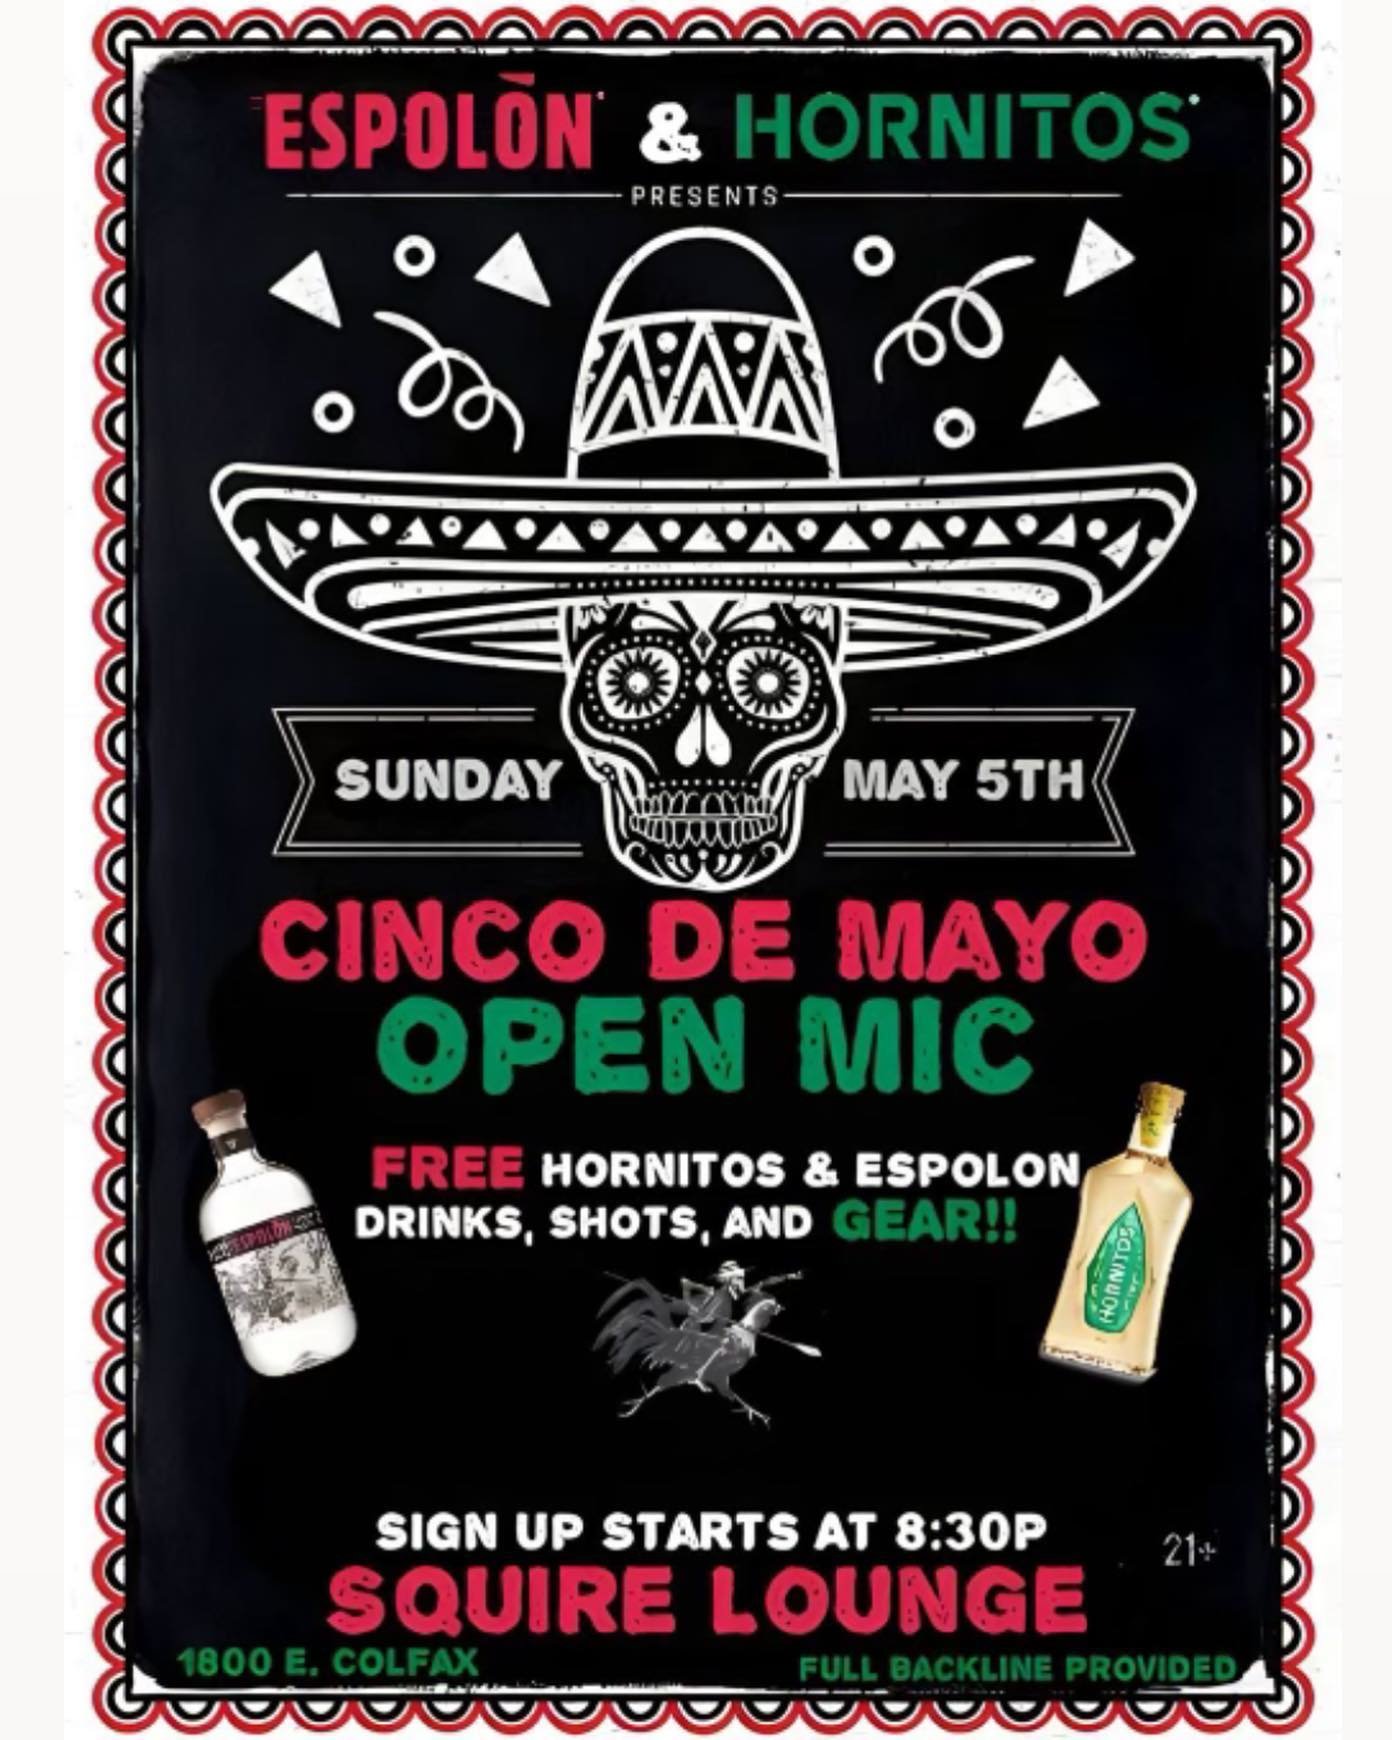 SPECIAL BOOZE &amp; GEAR GIVEAWAY SUNDAY! Come celebrate Cinco de Mayo with Espolon and Hornitos at our legendary Open Mic! Sign up at 8:30pm, full backline provided. See you there!